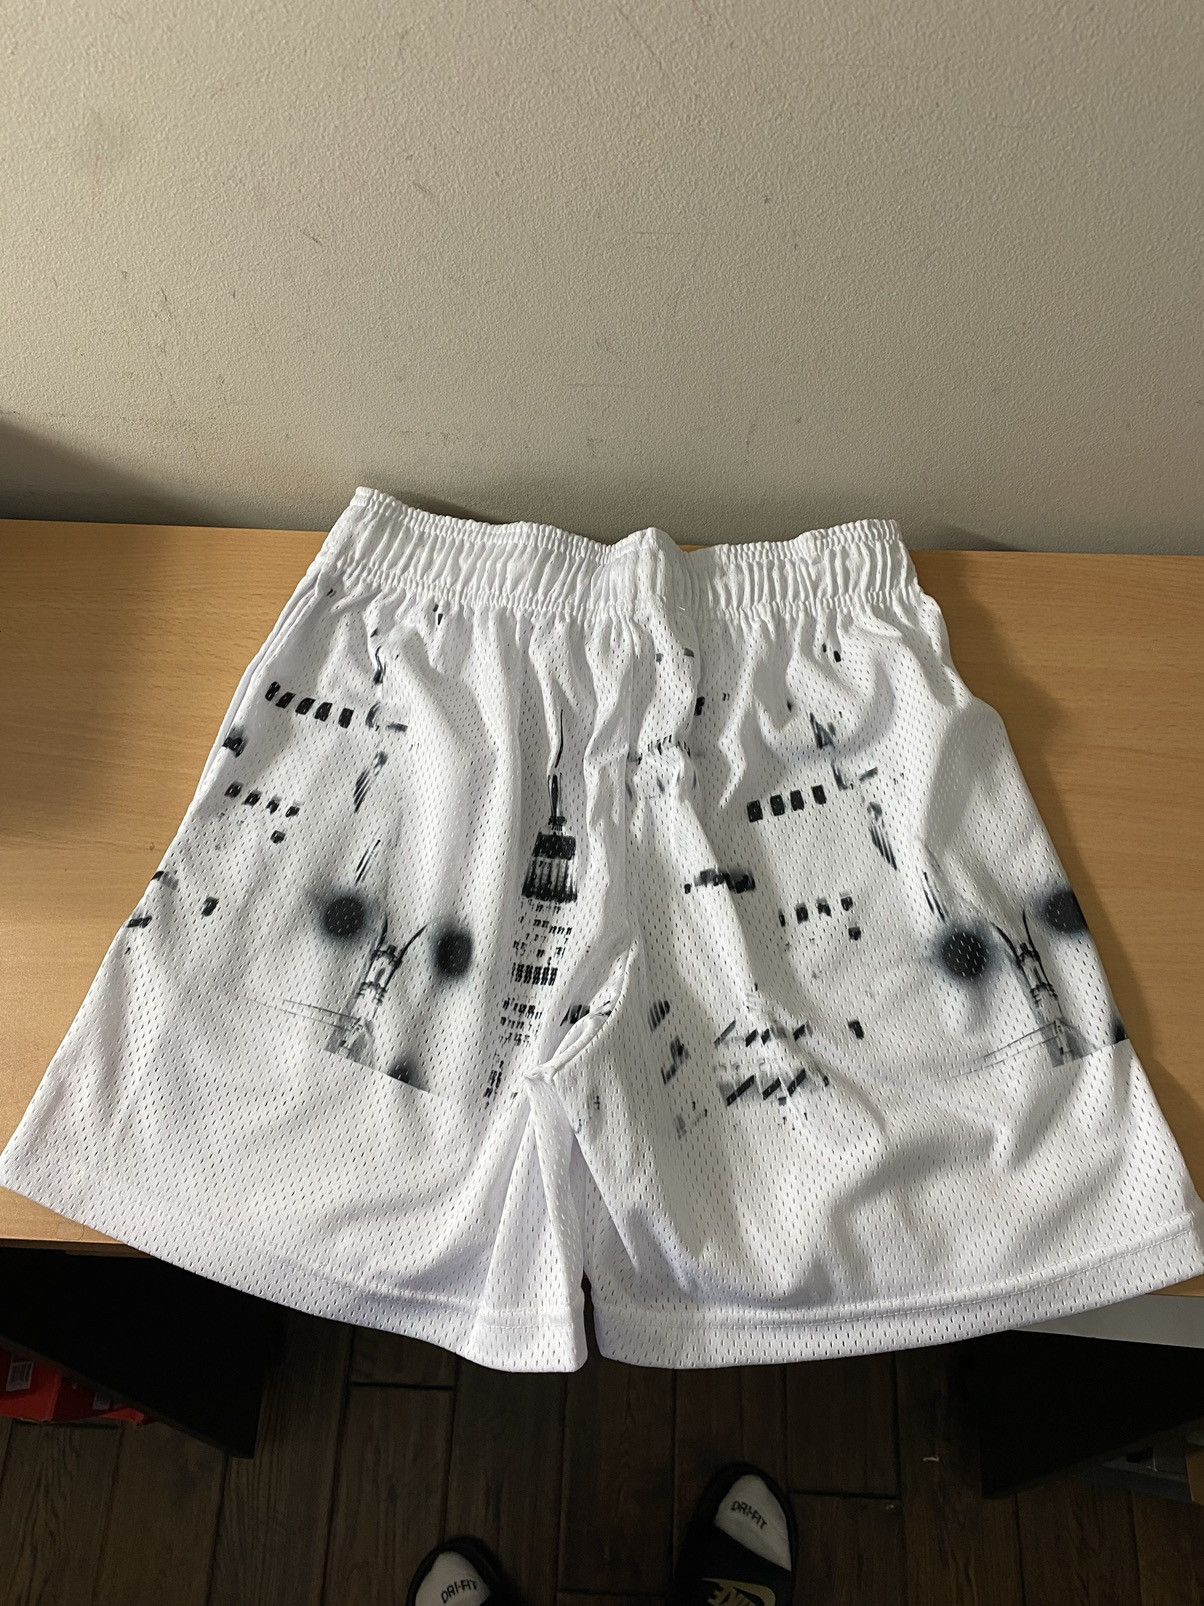 Eric Emanuel EE White Skyline Shorts (M) Size US 32 / EU 48 - 2 Preview